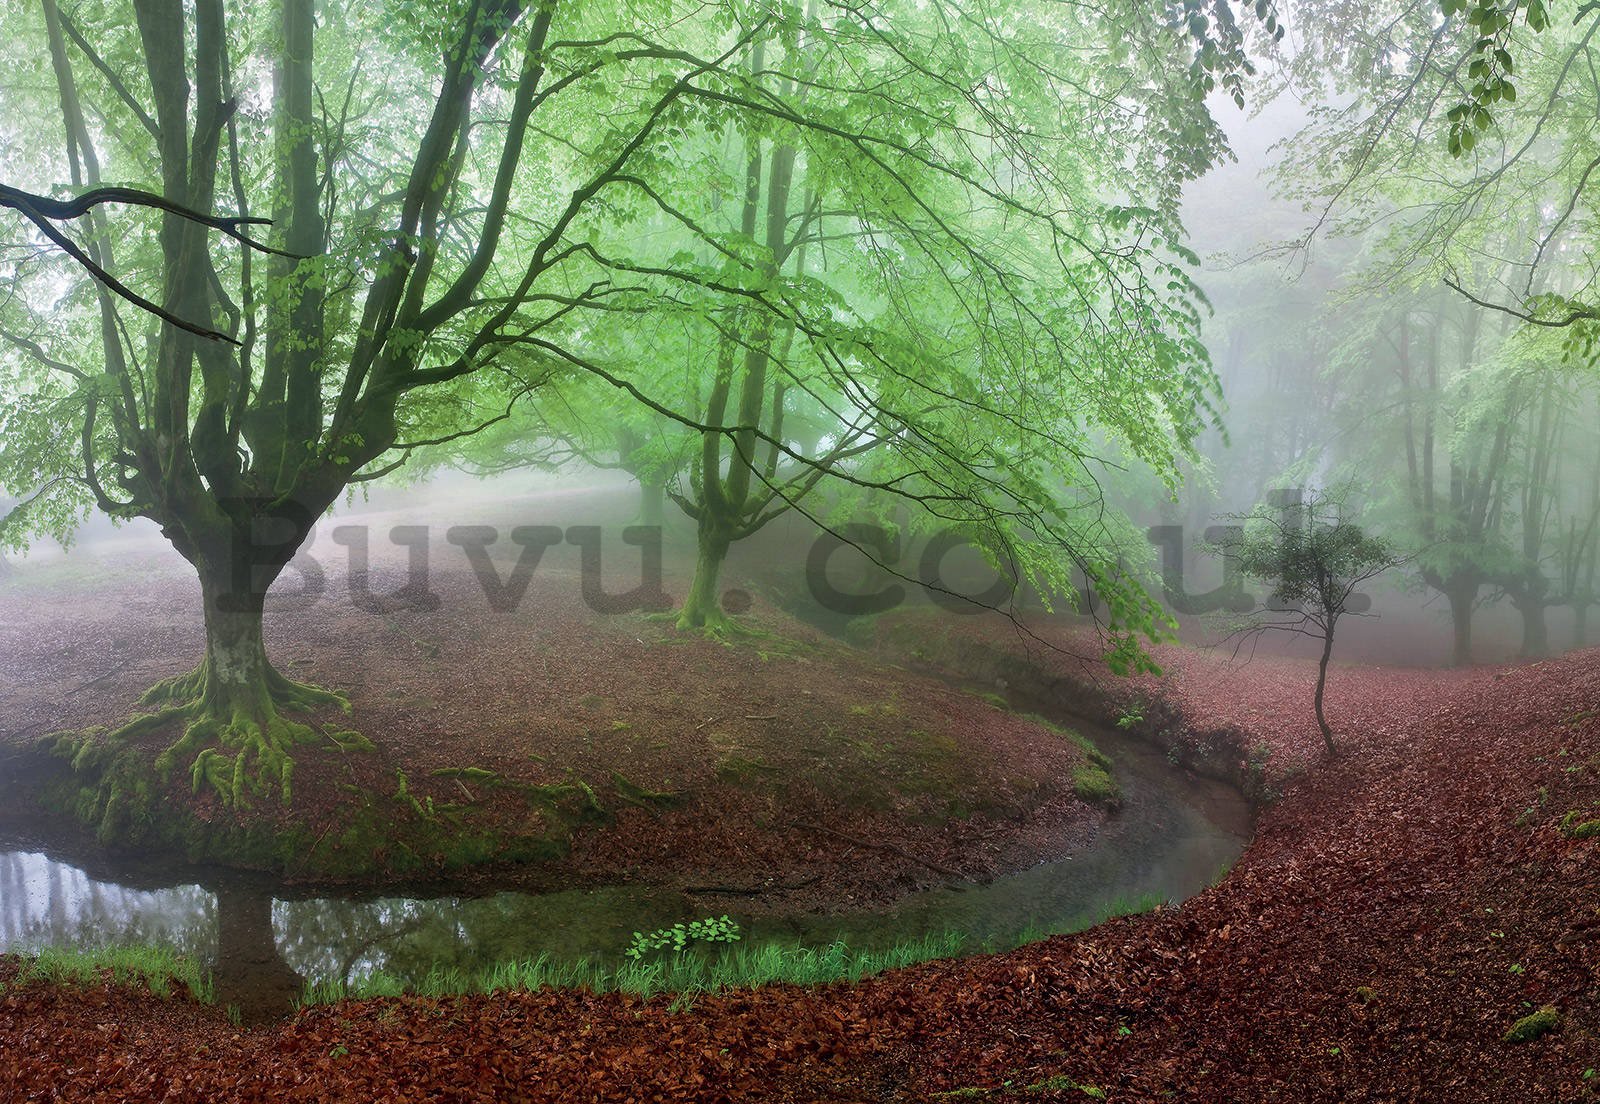 Wall mural: Forest in fog (1) - 368x254cm